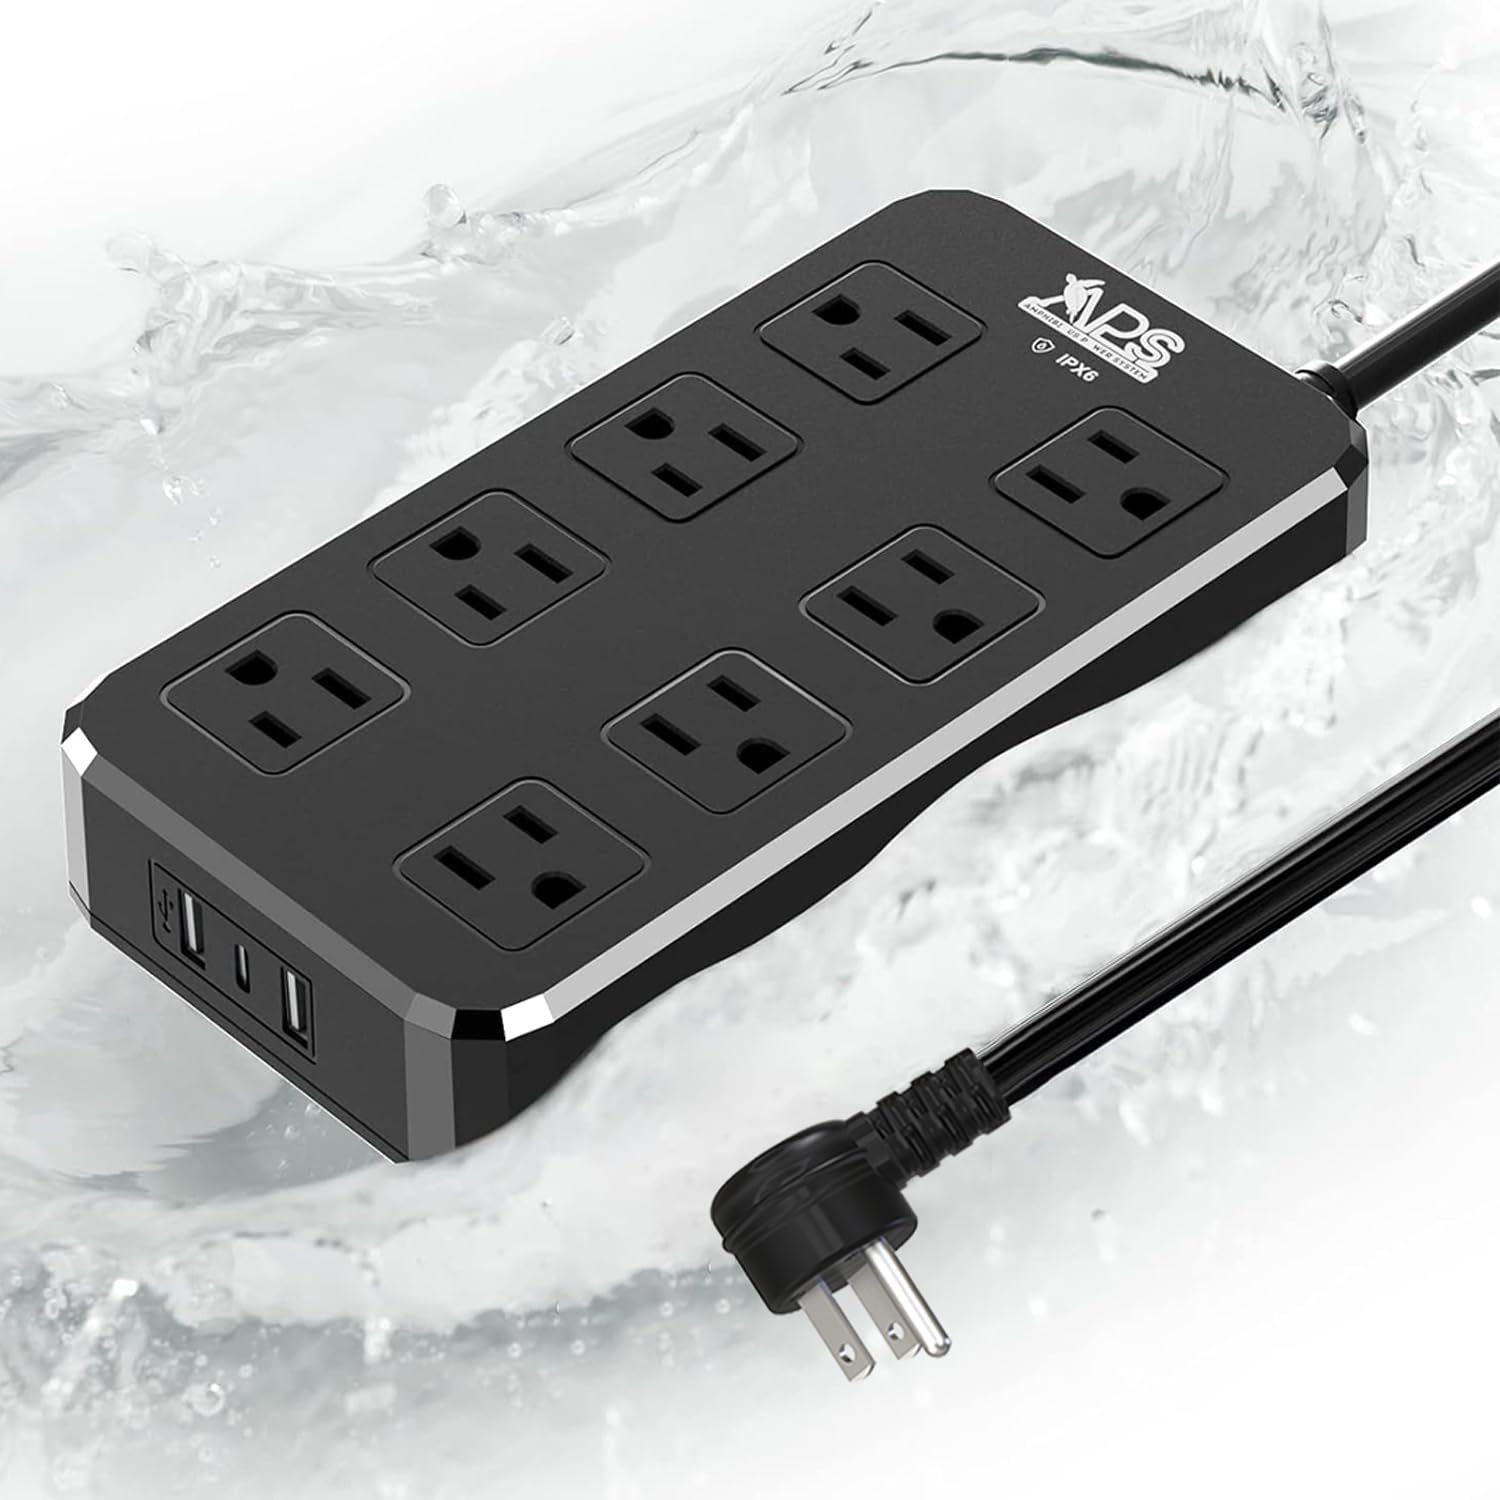 8-Outlet 6FT Extension Cord Outdoor Power Strip with 3 USB(1 USBC)  Waterproof Port All-Weatherproof with Switch and 1875W Overload Protection.  Ideal for Outdoor Lights. UL Listed Black 6FT 8 Outlets (6FT) Black